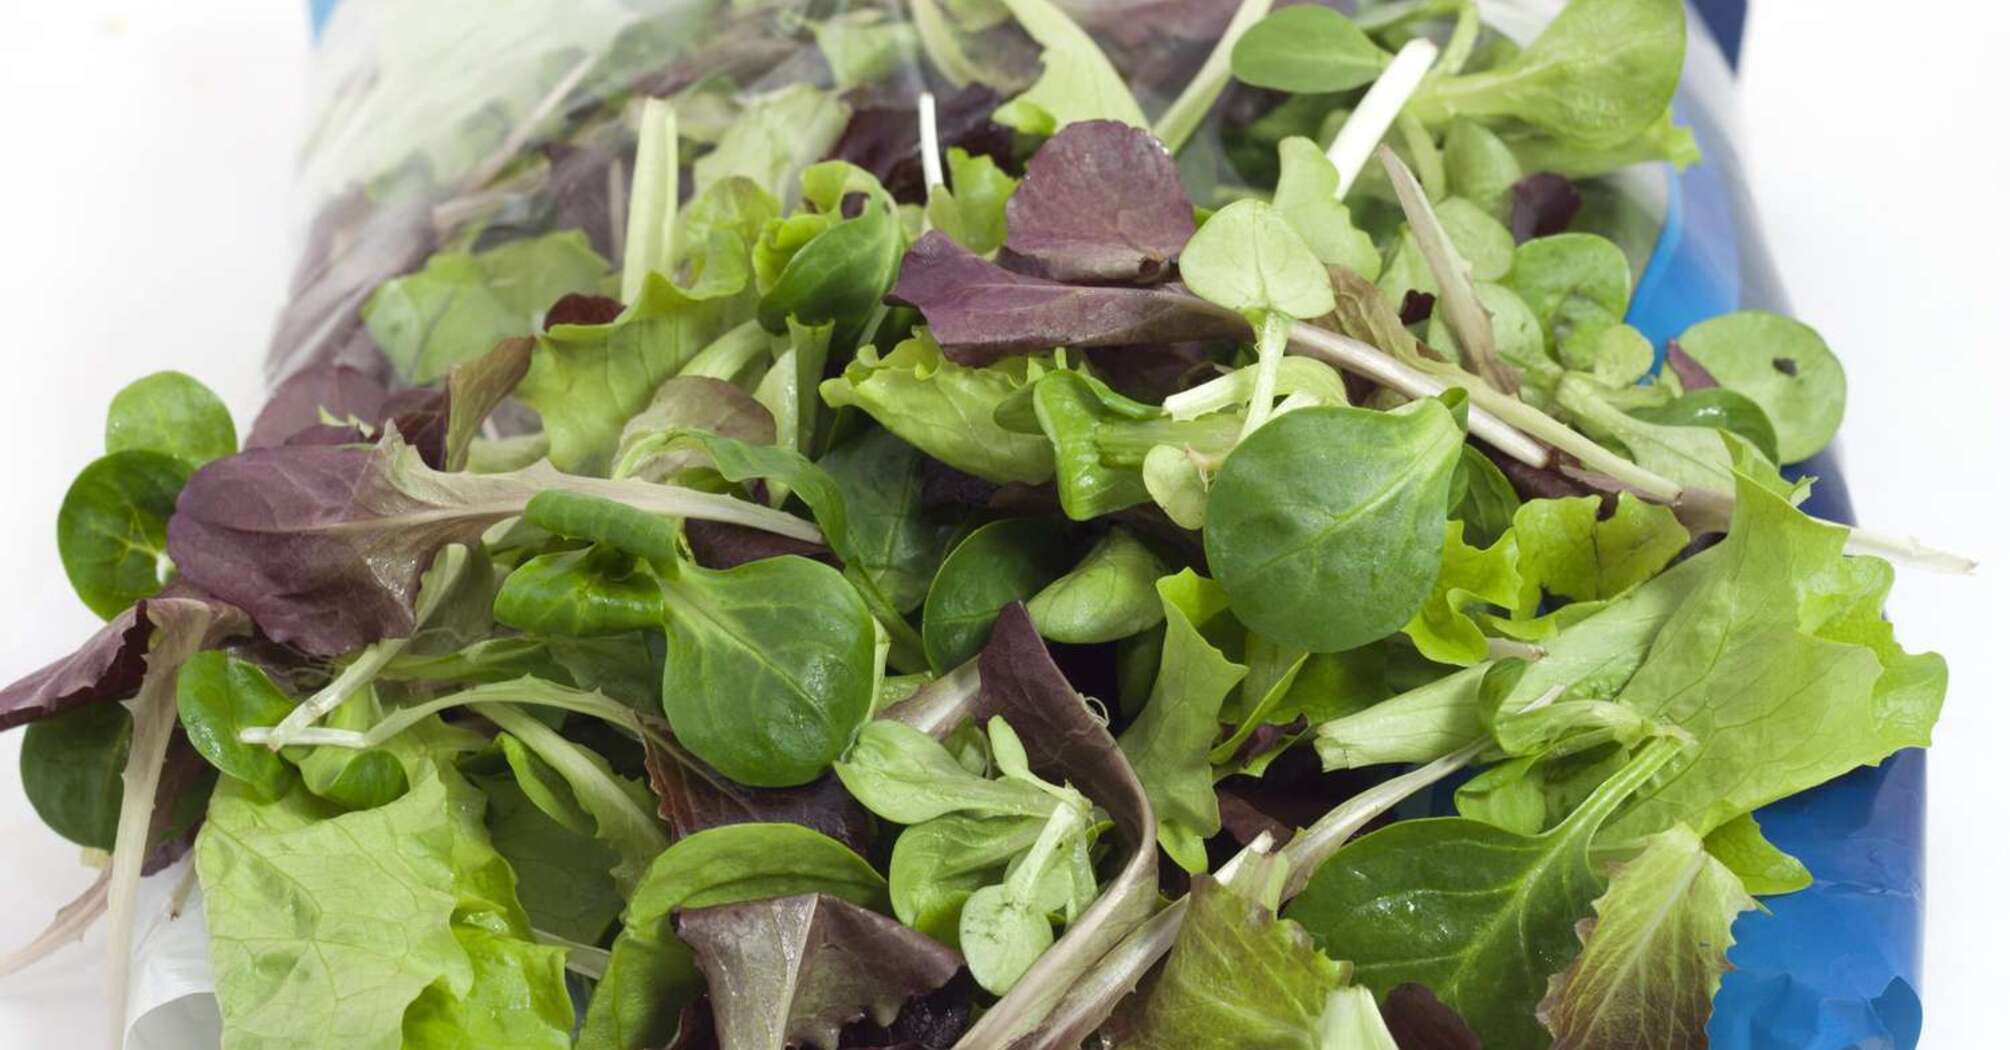 What to do with packaged greens